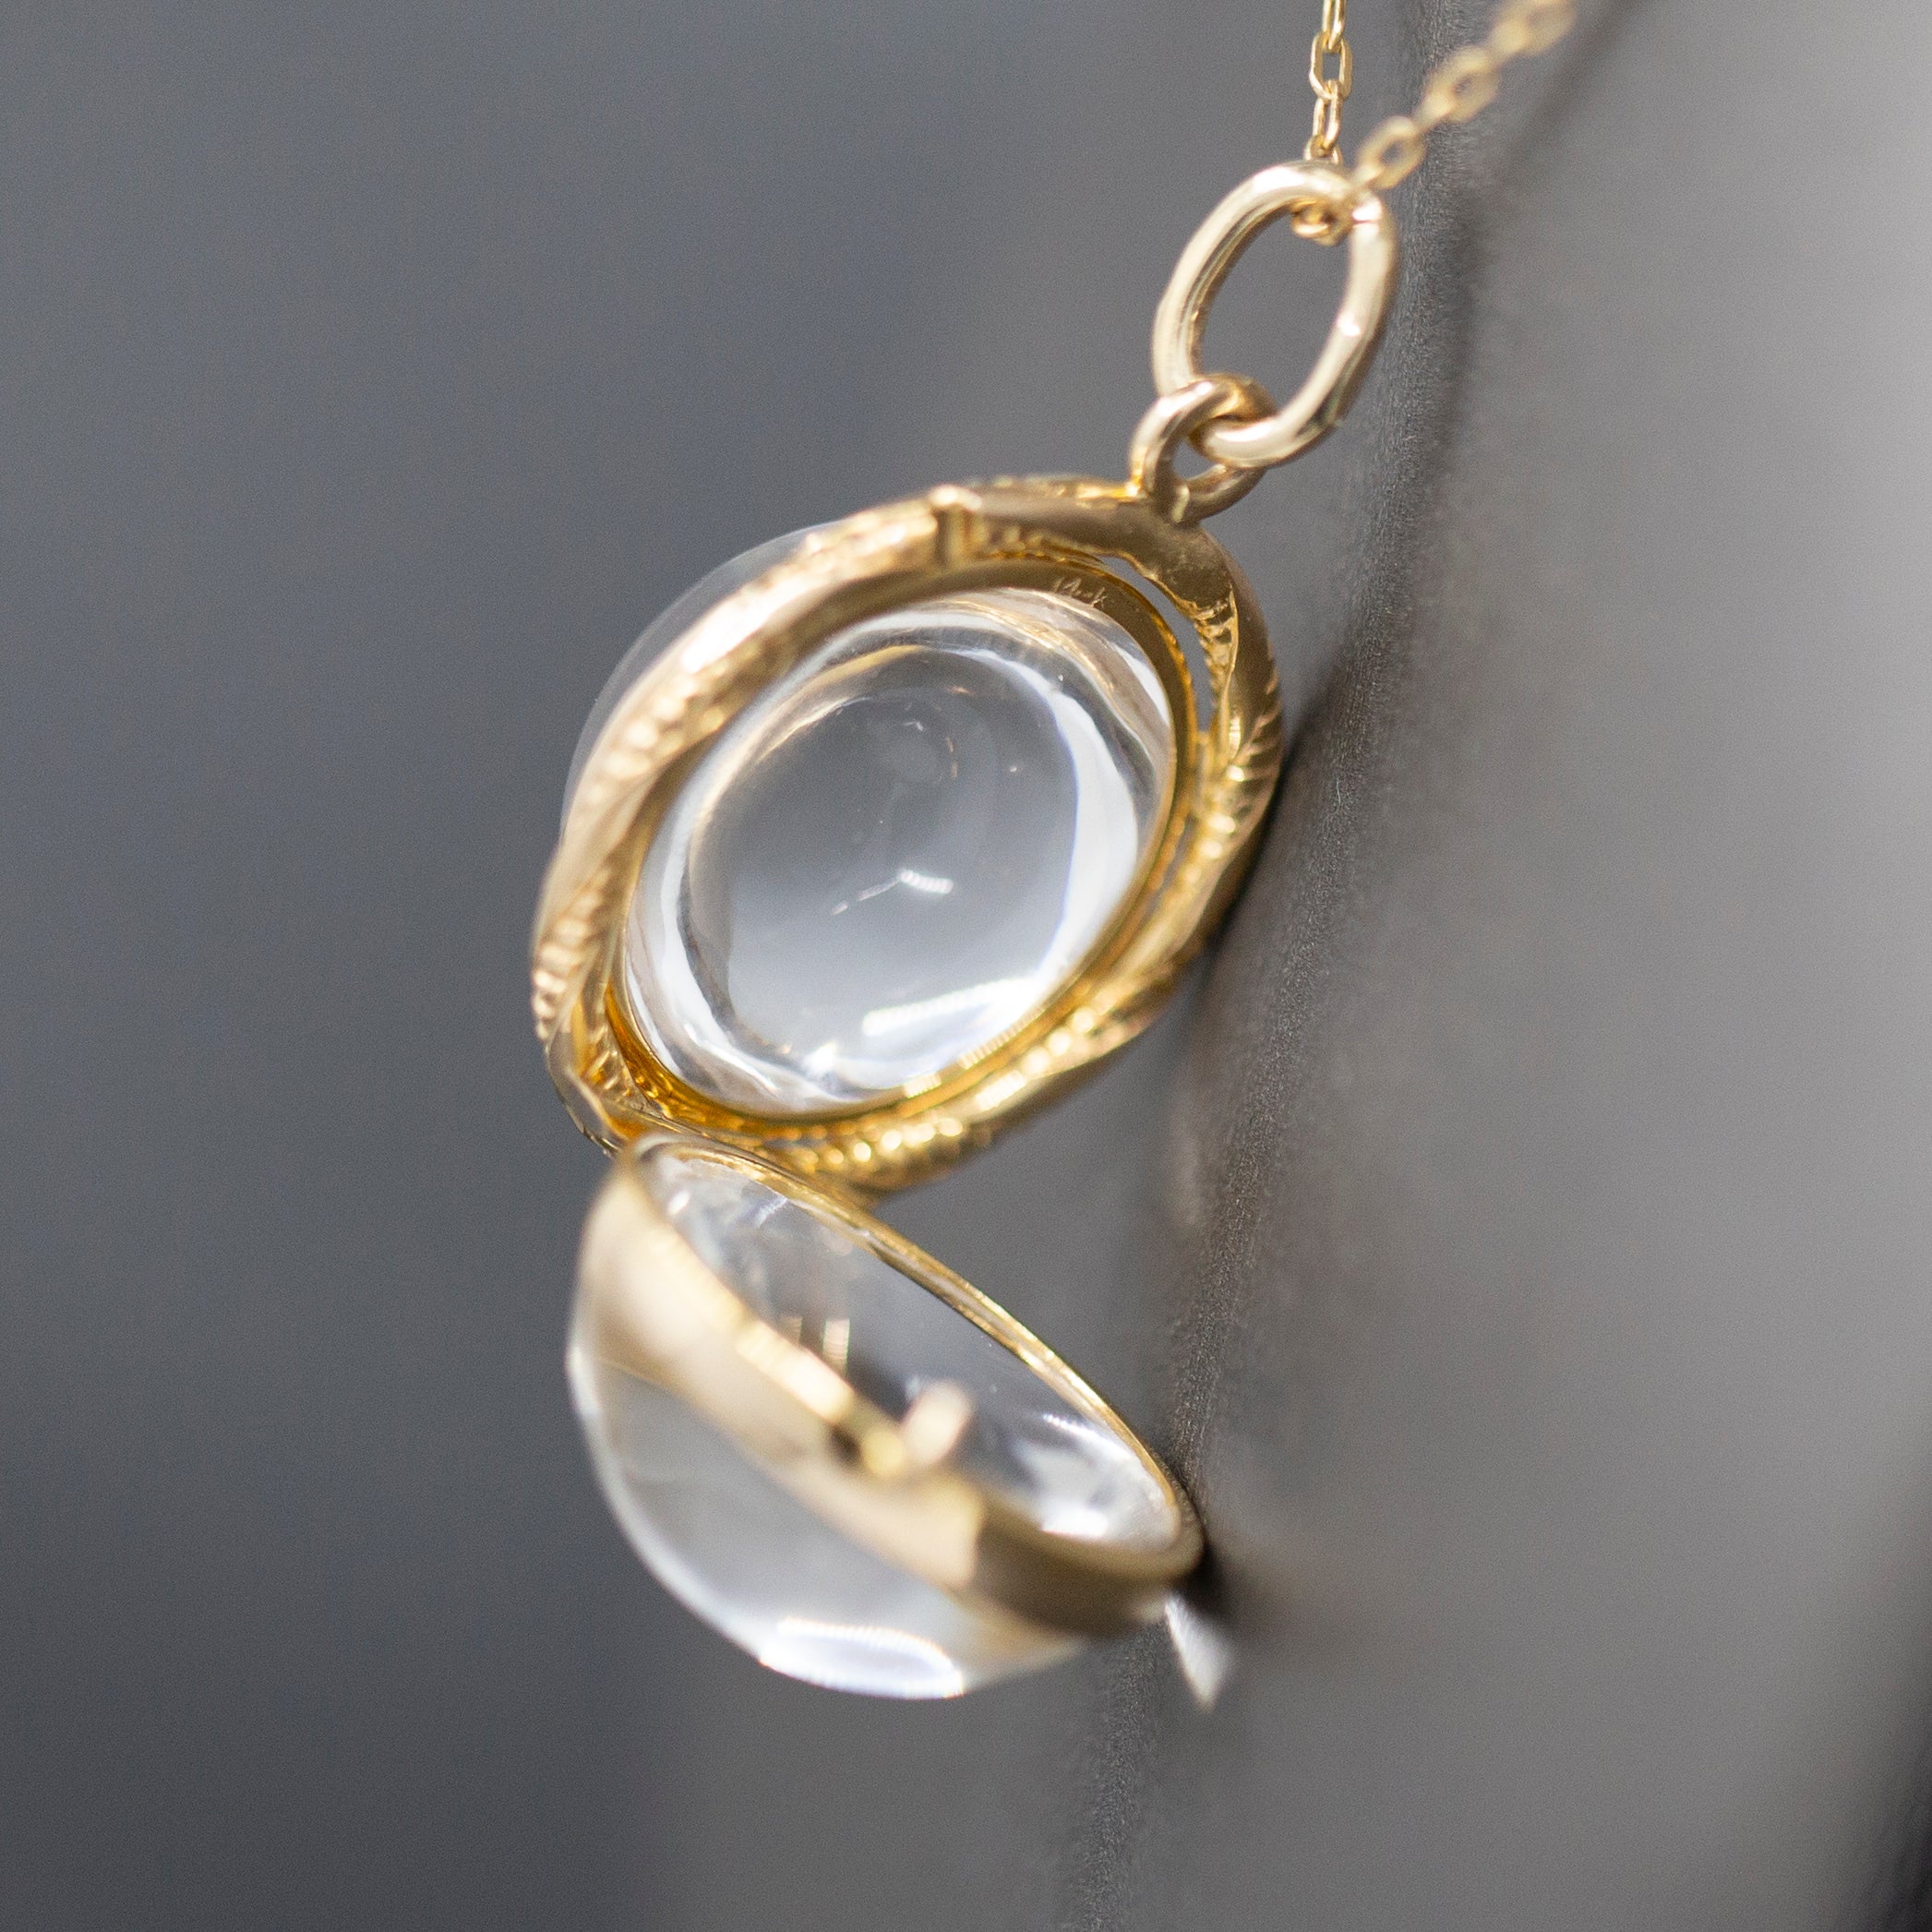 Antique Victorian Pools of Light Double Sided Rock Crystal Quartz Locket in 14k Yellow Gold